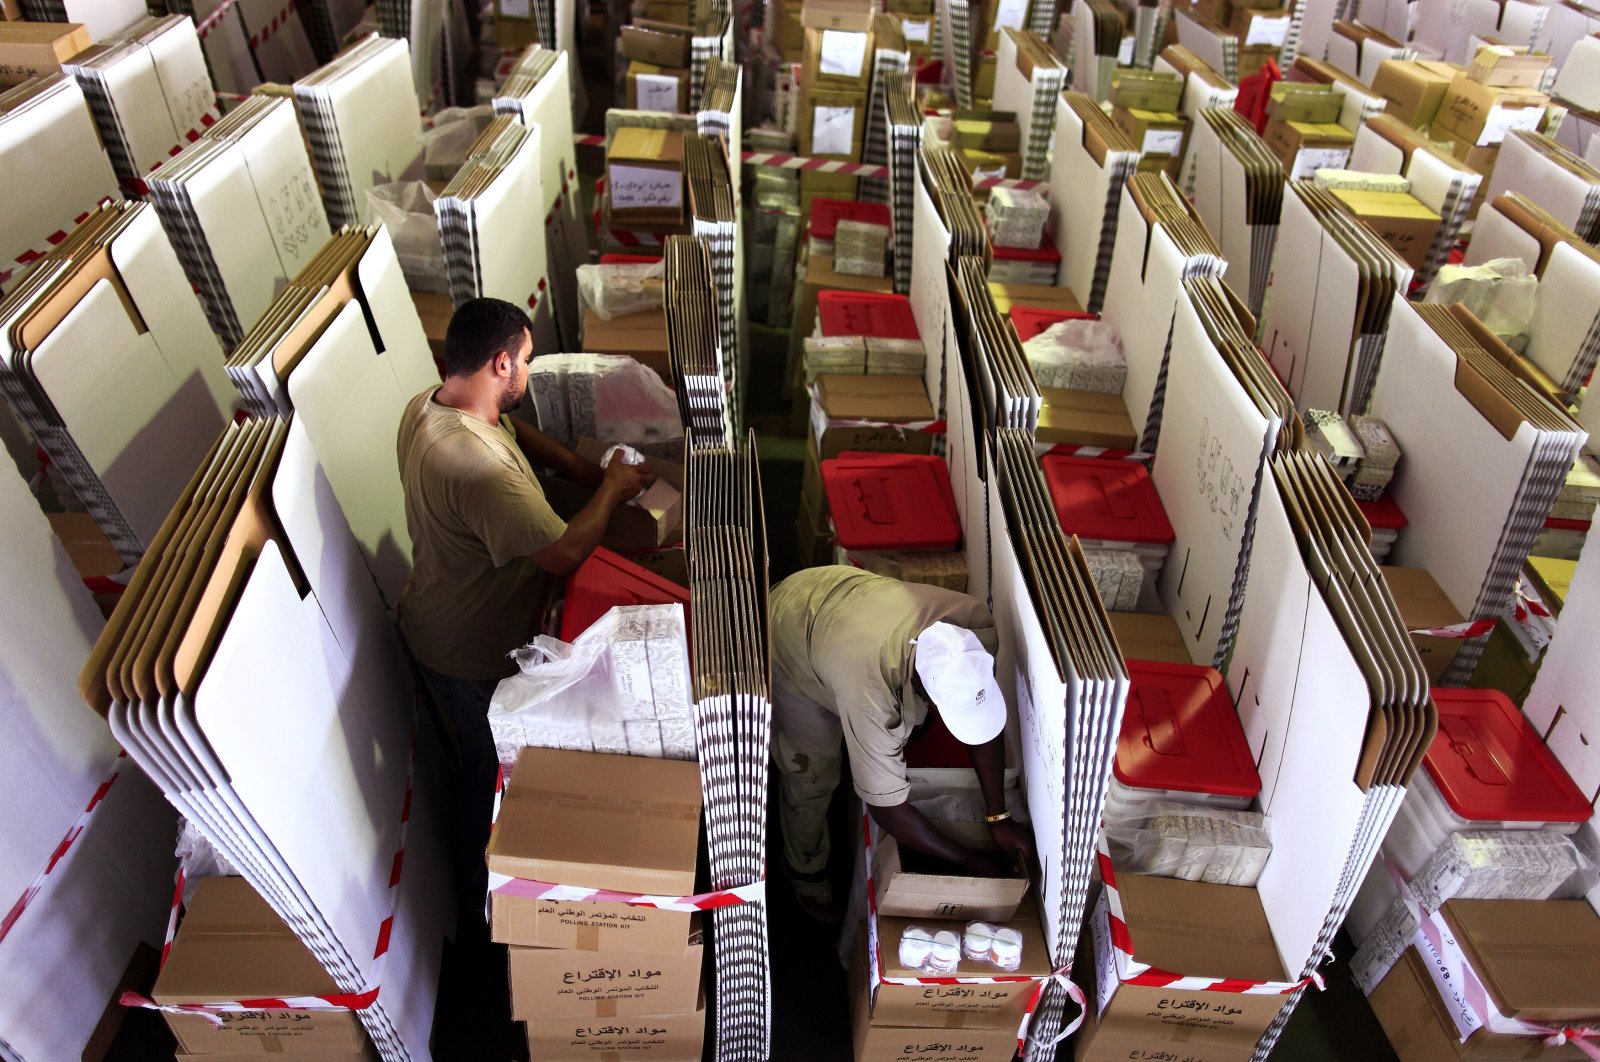 High Election commission workers do a final check on voting equipment before distributing to polling stations at a shed in Maatika airport, Tripoli, July 3, 2012. (Reuters File Photo)